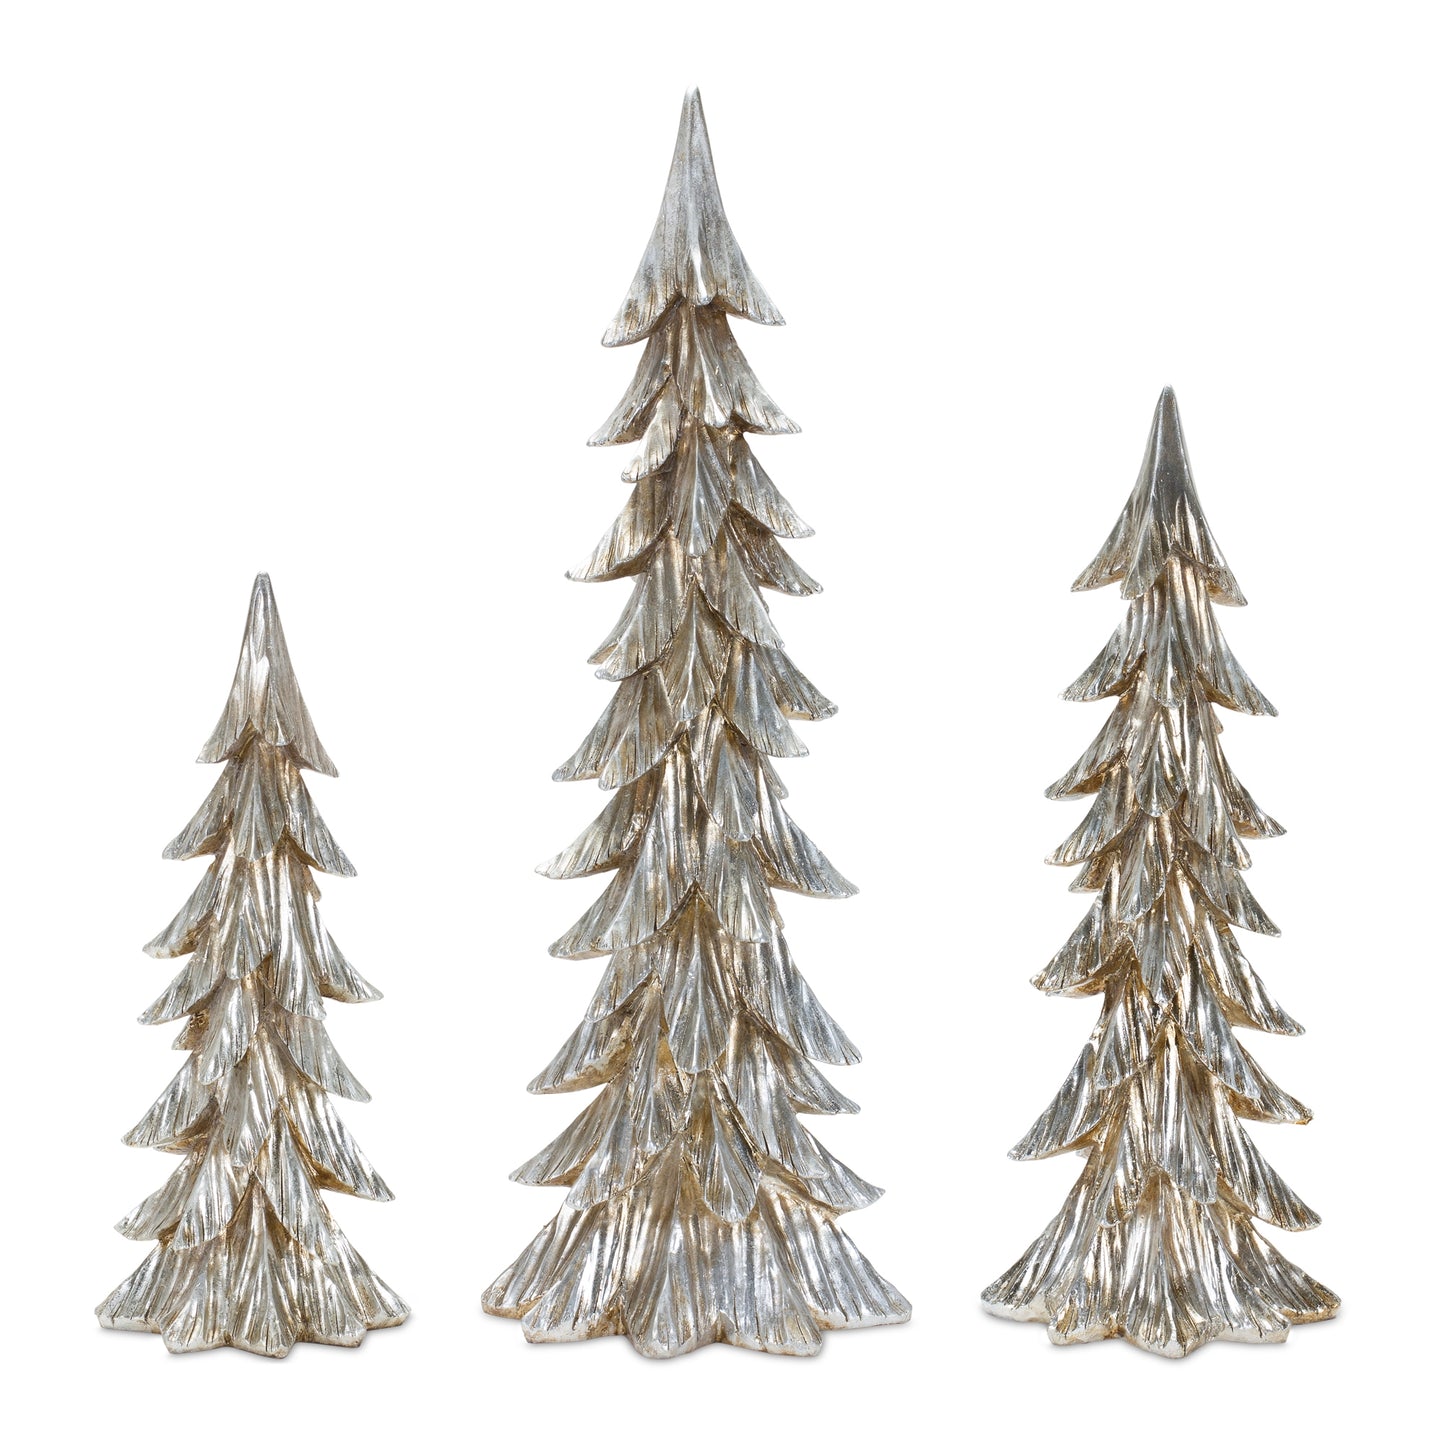 Carved Stone Pine Tree Décor with Silver Finish (Set of 3)